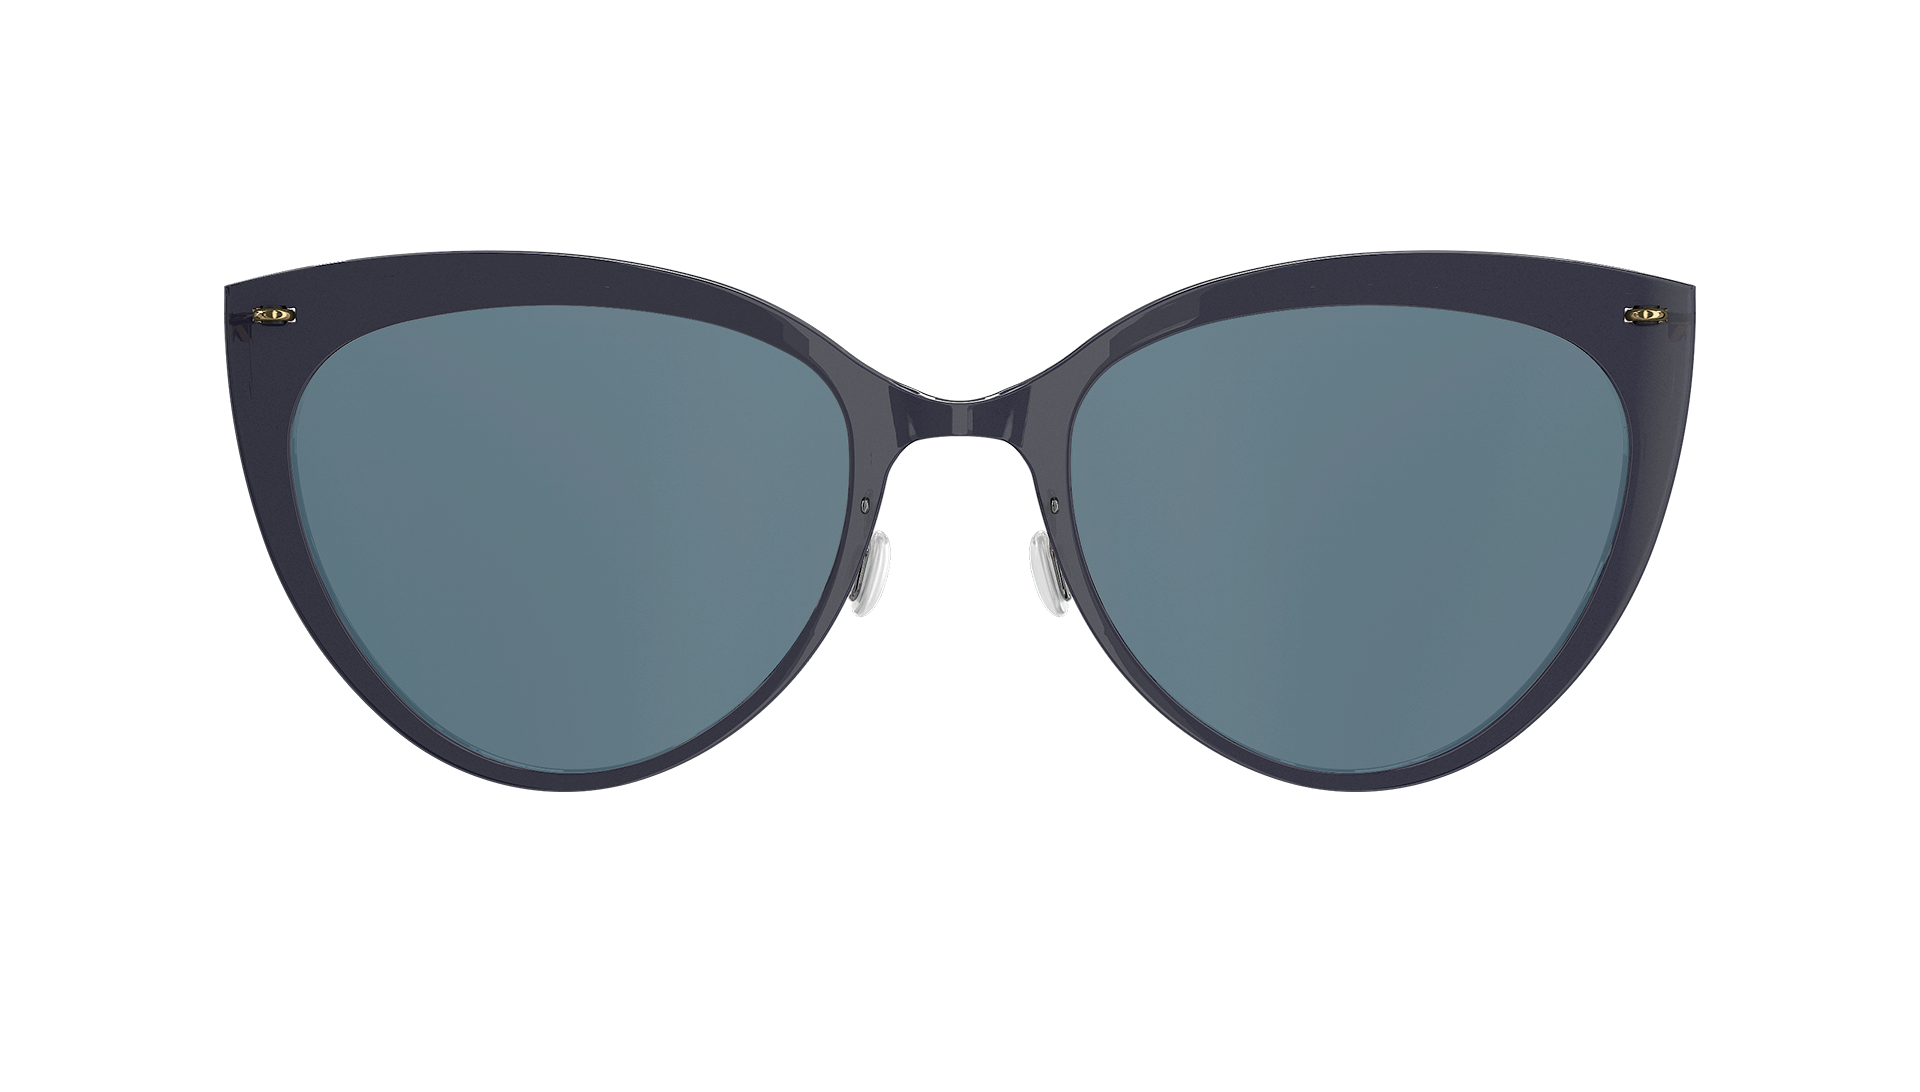 LINDBERG now Model 8311 black sunglasses featuring a cat eye shape with blue grey tinted lenses